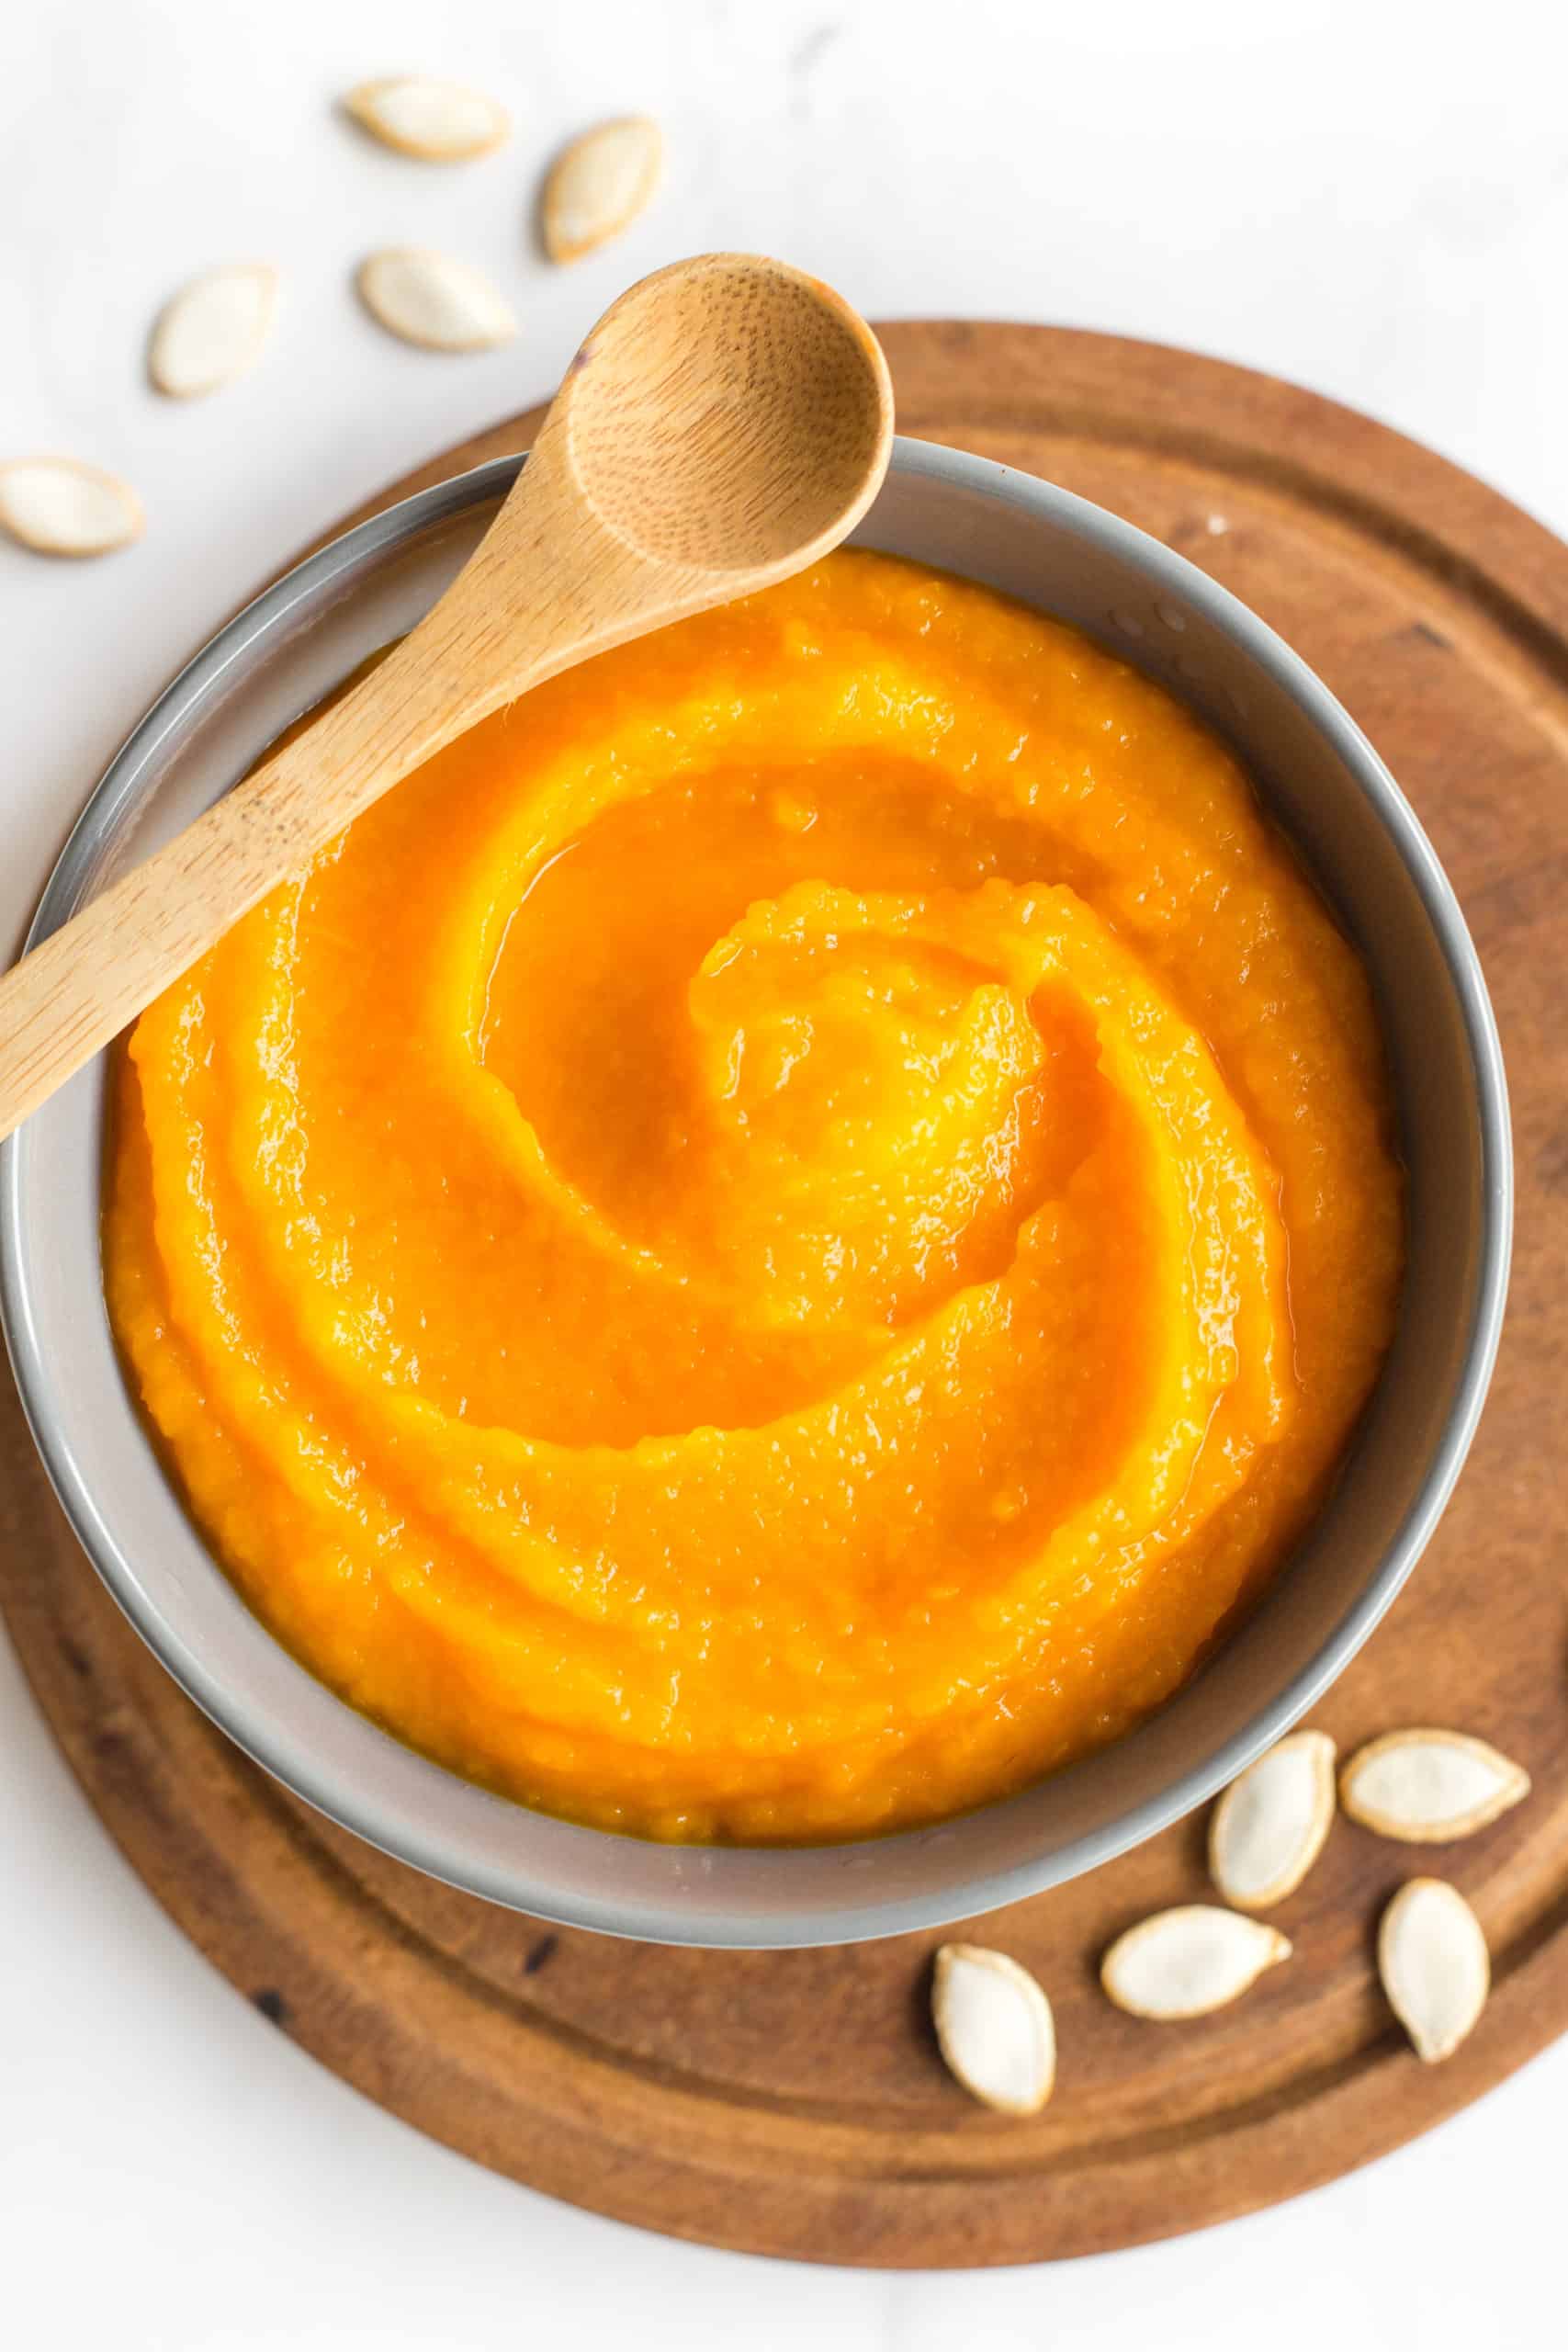 A bowl of freshly made pure pumpkin puree on a wooden board.